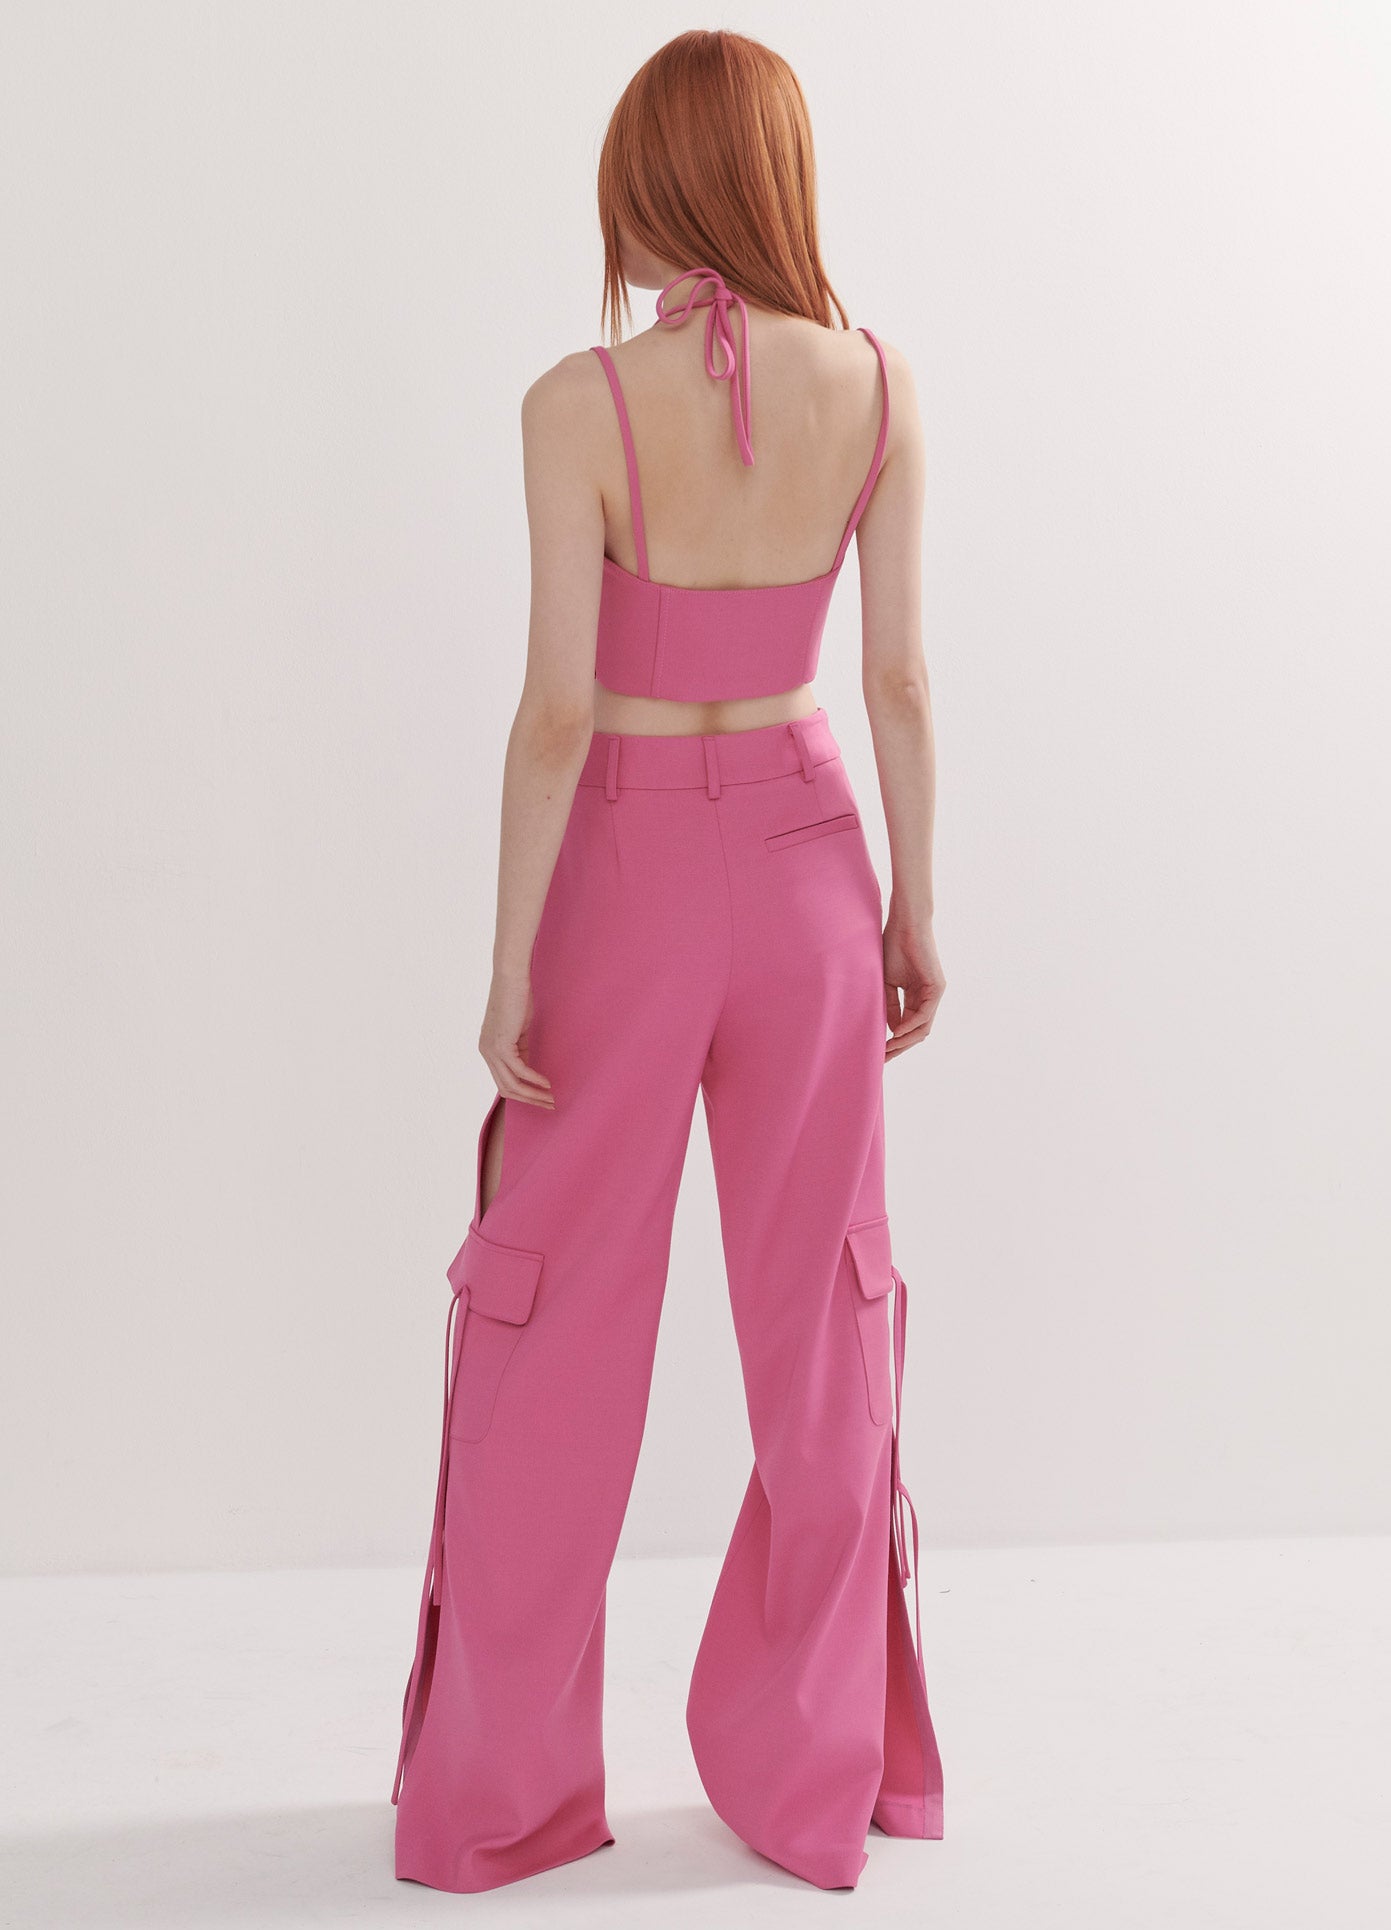 MONSE Stud Lacing Bustier in Pink on Model Full Back View